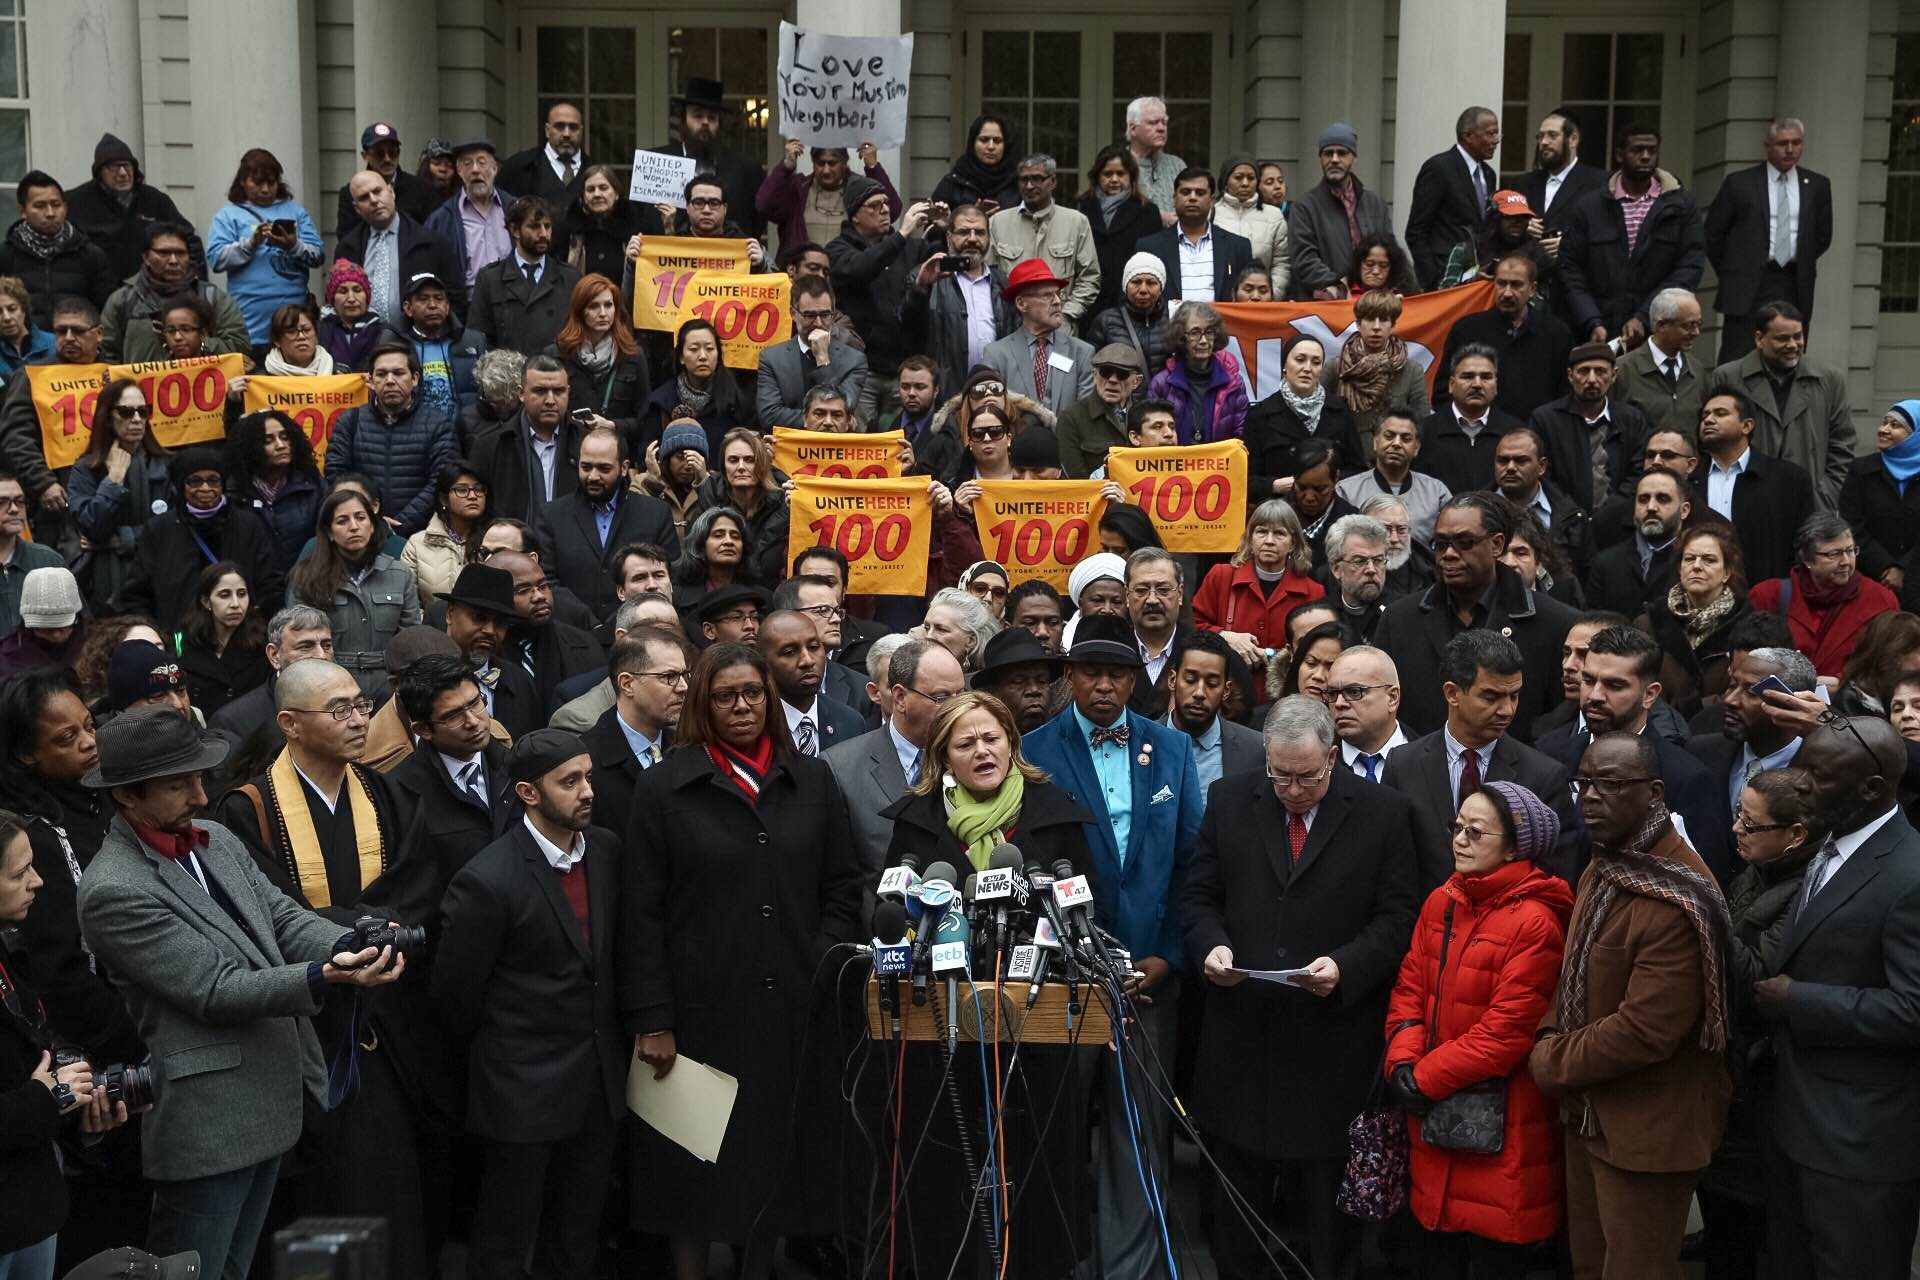 New York politicians, led by Council Speaker Melissa Mark-Viverito, held a rally decrying Donald Trump at City Hall today. (Photo: William Alatriste for New York City Council)